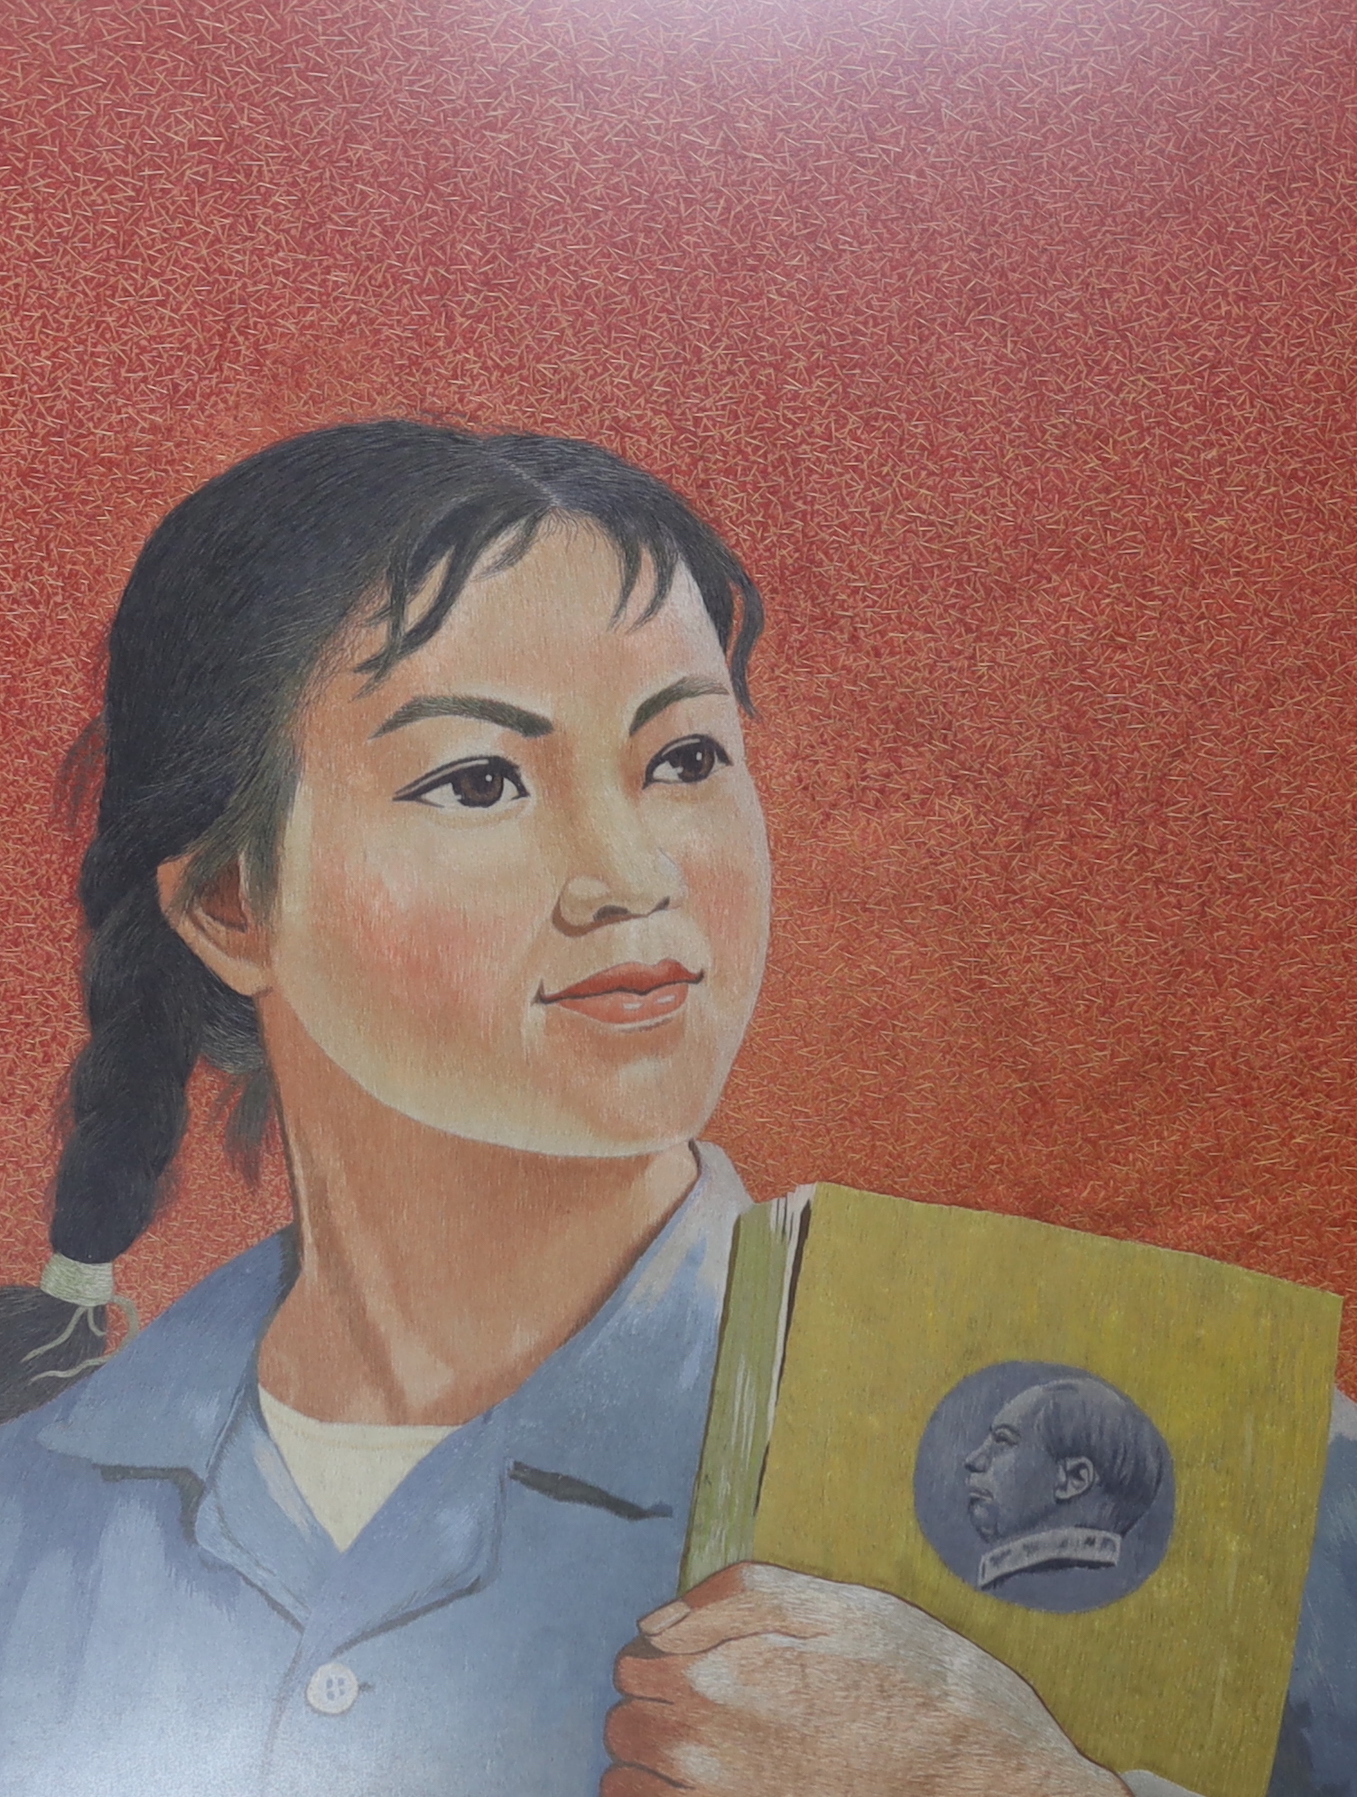 A framed Cultural Revolution embroidery picture of a girl holding a book and a porcelain tile of Mao, embroidery 34.5cm wide x 44.5cm high